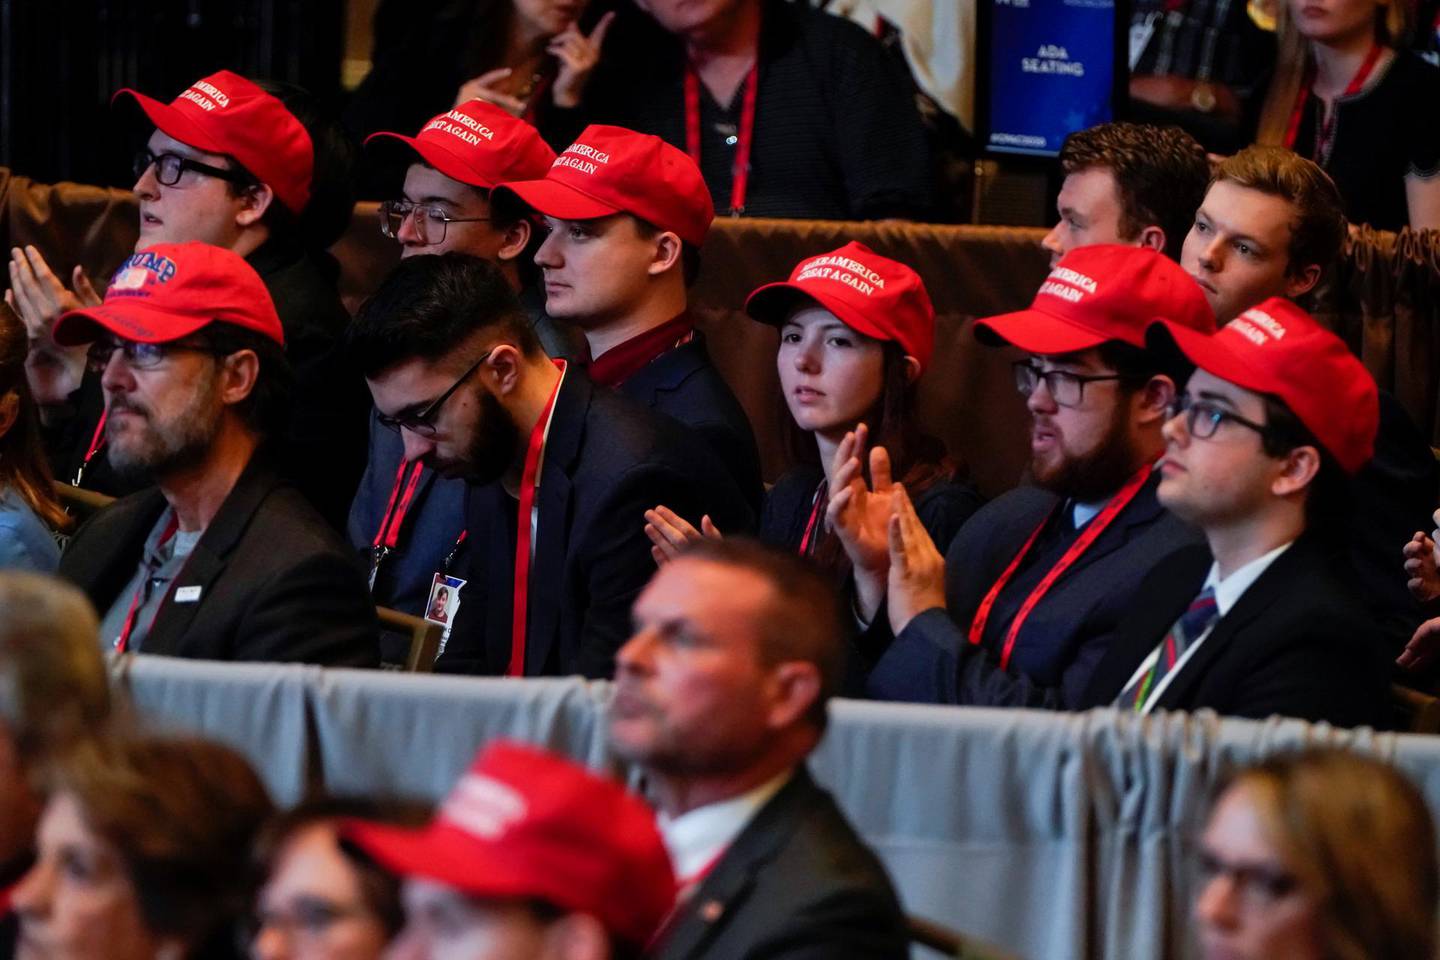 People wearing MAGA hats listen as U.S. Vice President Mike Pence speaks at the Conservative Political Action Conference (CPAC) annual meeting at National Harbor in Oxon Hill, Maryland, U.S., February 27, 2020.      REUTERS/Joshua Roberts